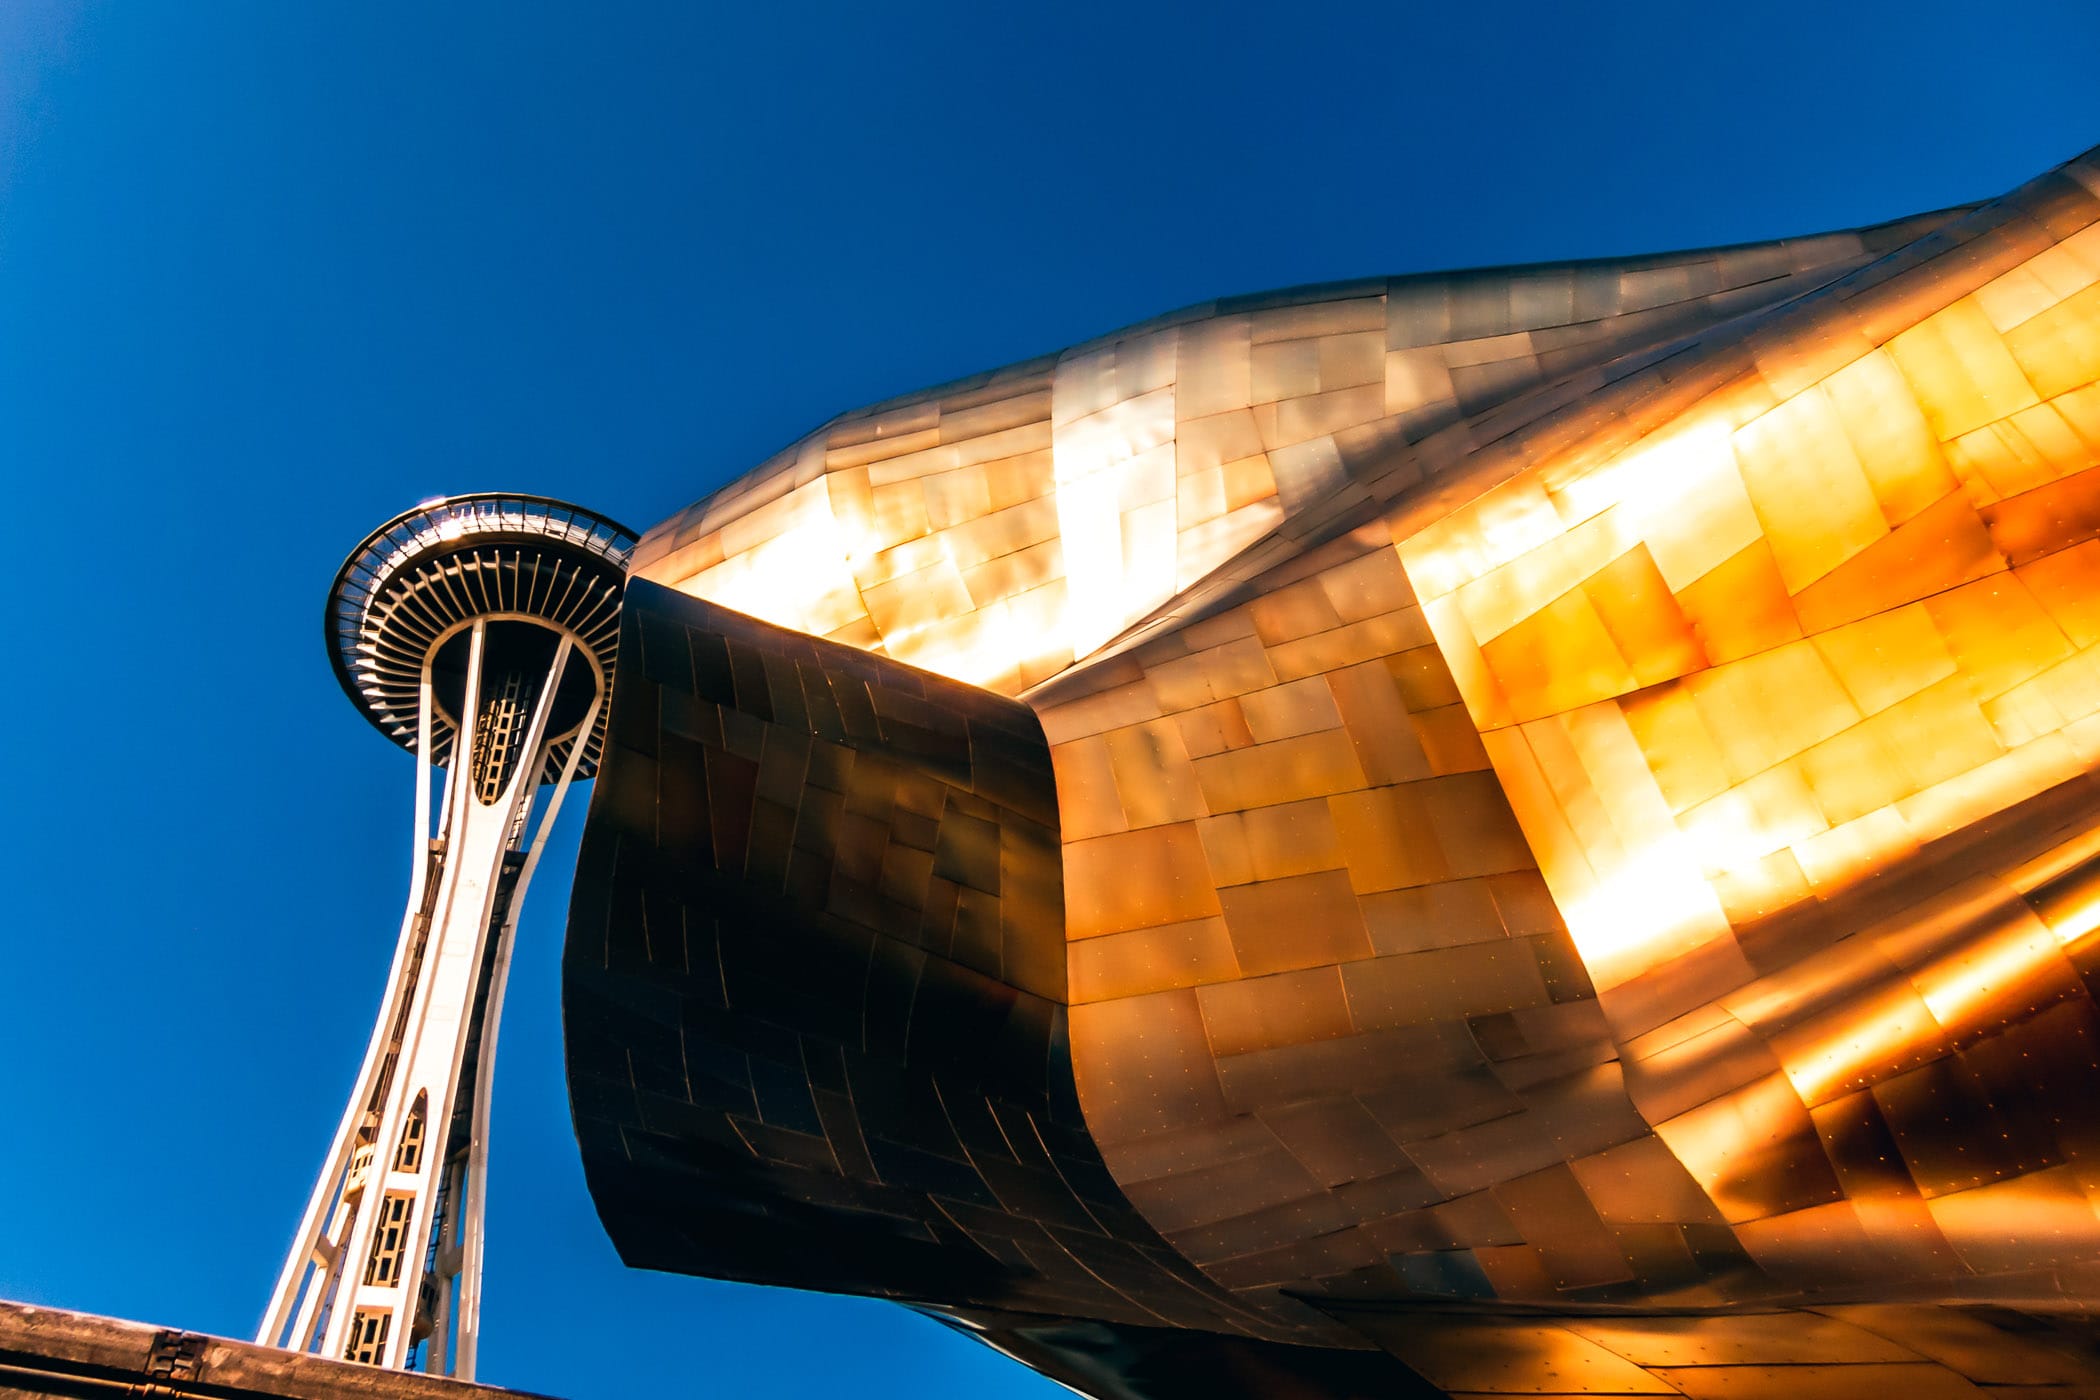 The Frank Gehry-designed Museum of Pop Culture (formerly the EMP Museum) obscures a portion of the adjacent Space Needle at the Seattle Center.